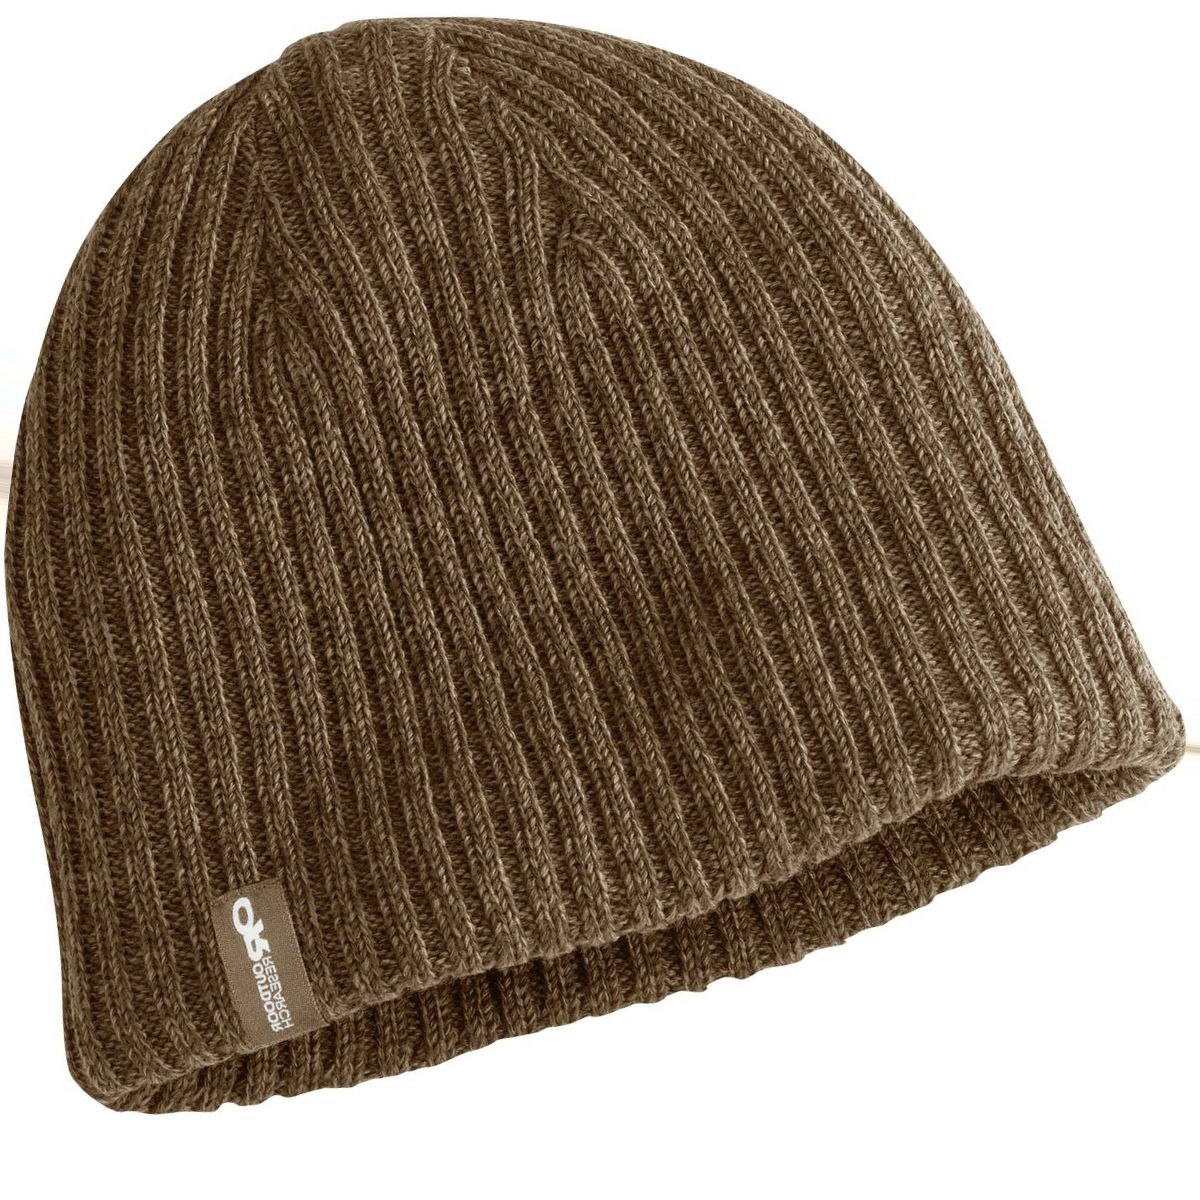 Outdoor Research Camber Beanie - Men's